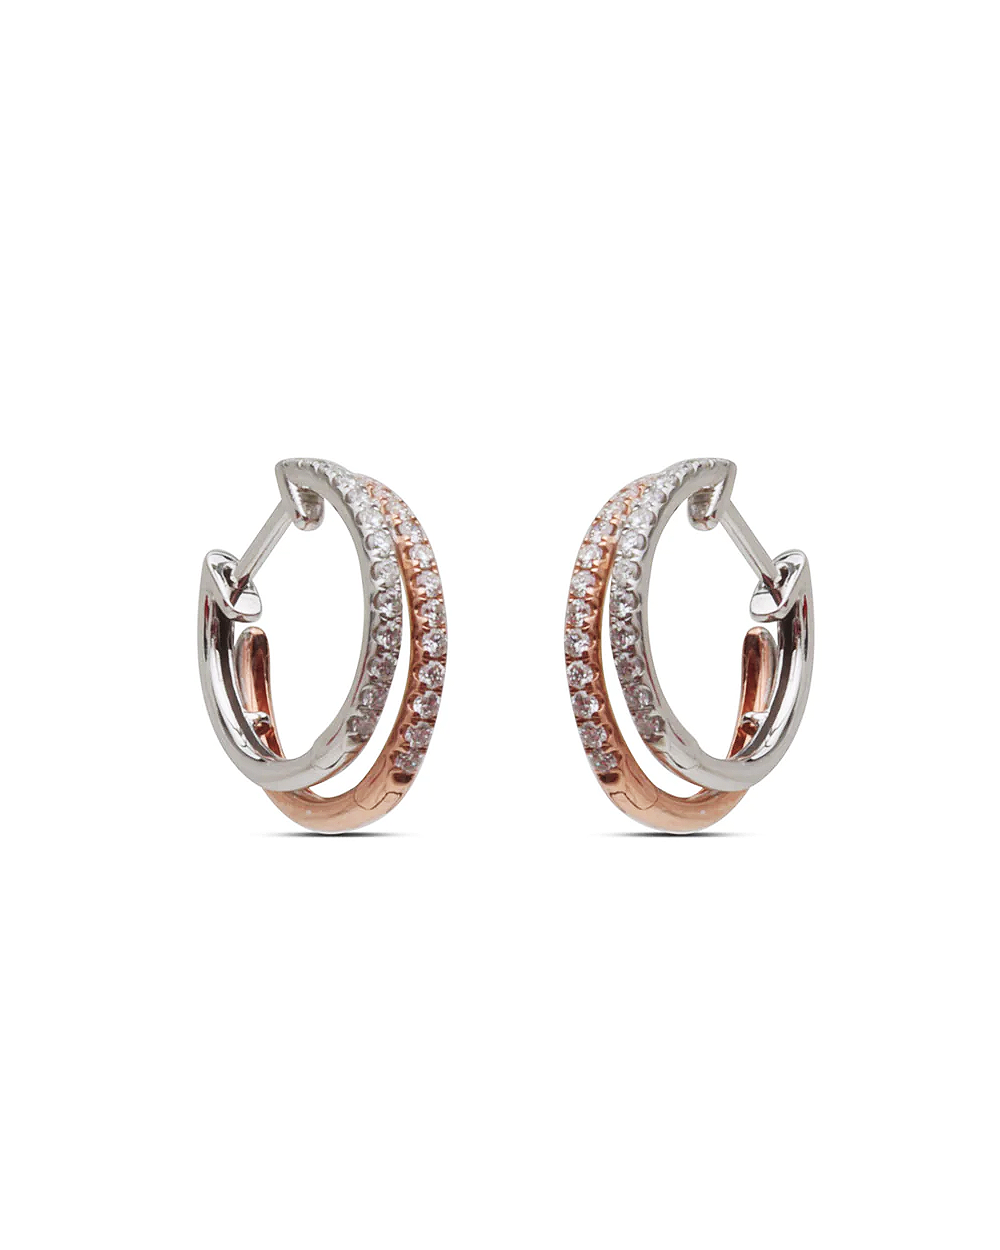 White and Rose Gold Diamond Double Row Earrings